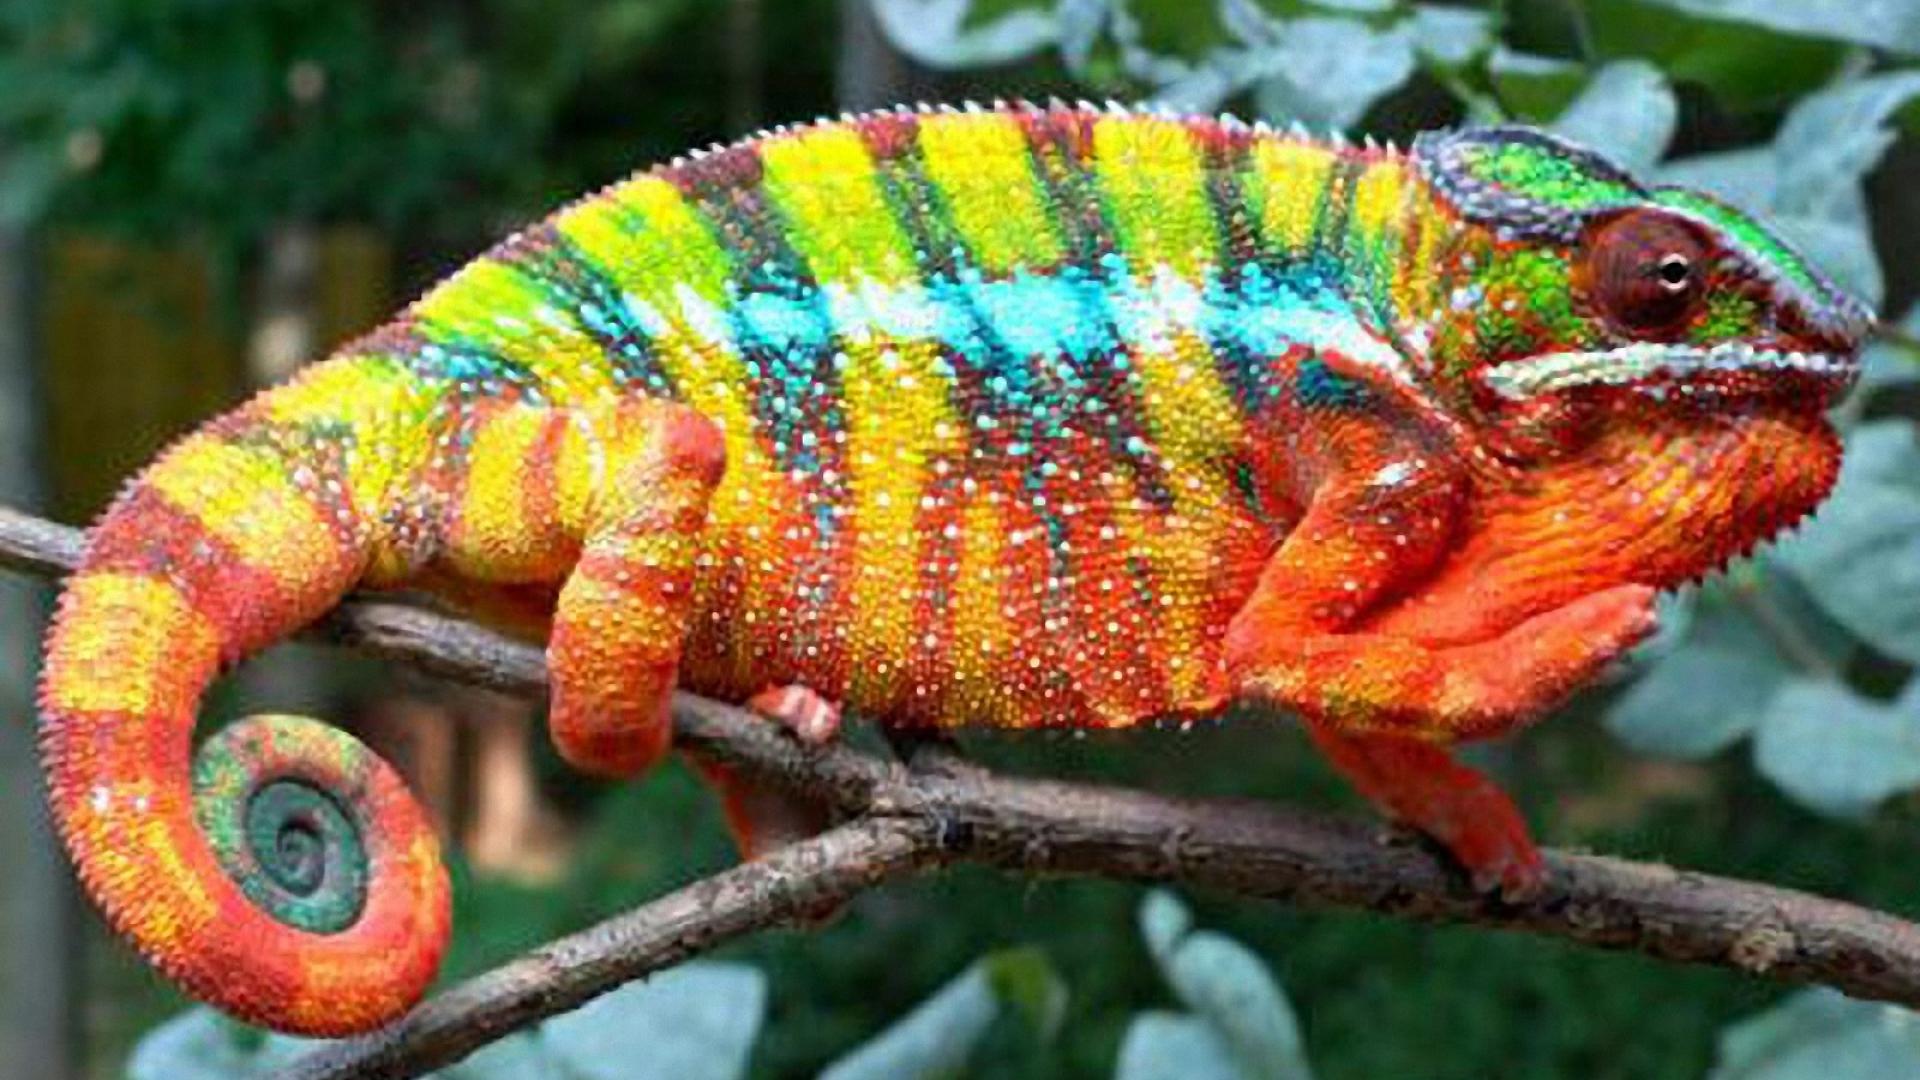 Panther Chameleon Reptile Wallpaper